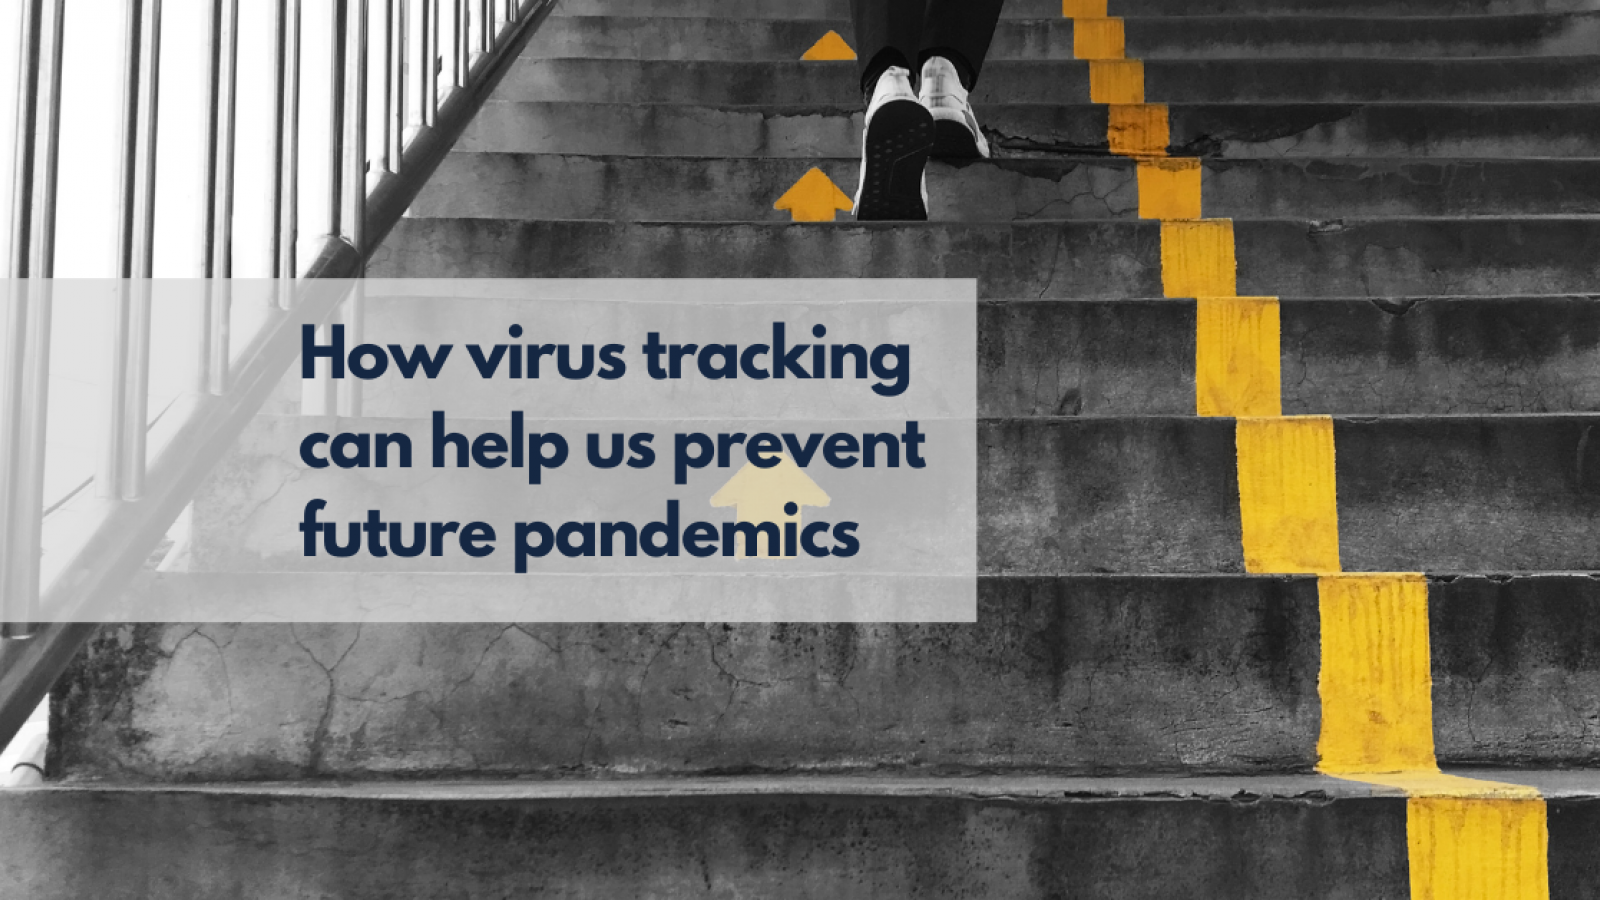 How virus tracking can help us prevent future pandemics